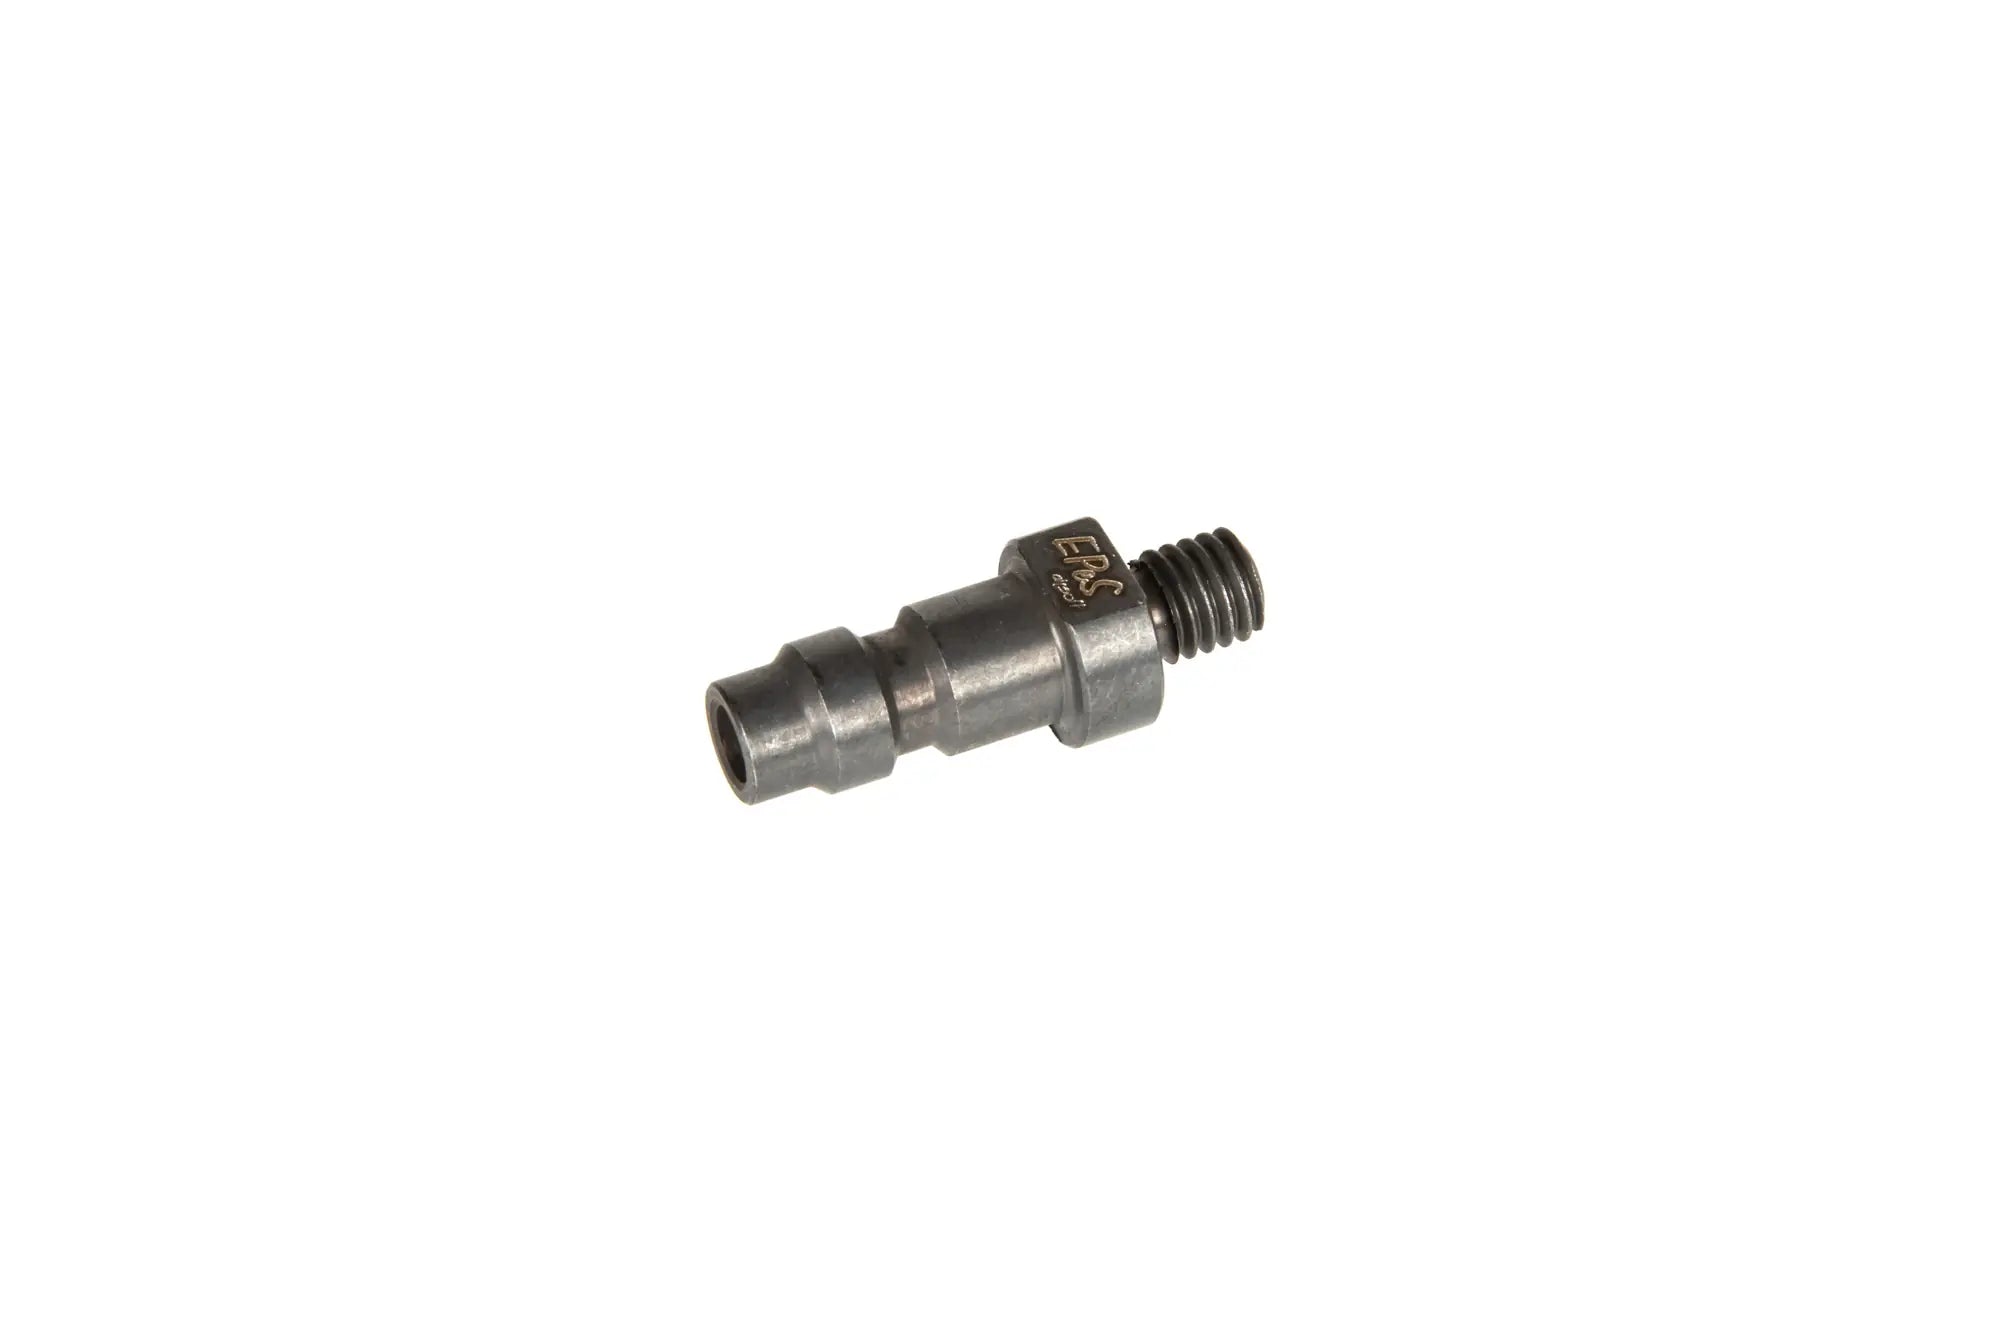 Adapter HPA to GBB with the M6 standard thread